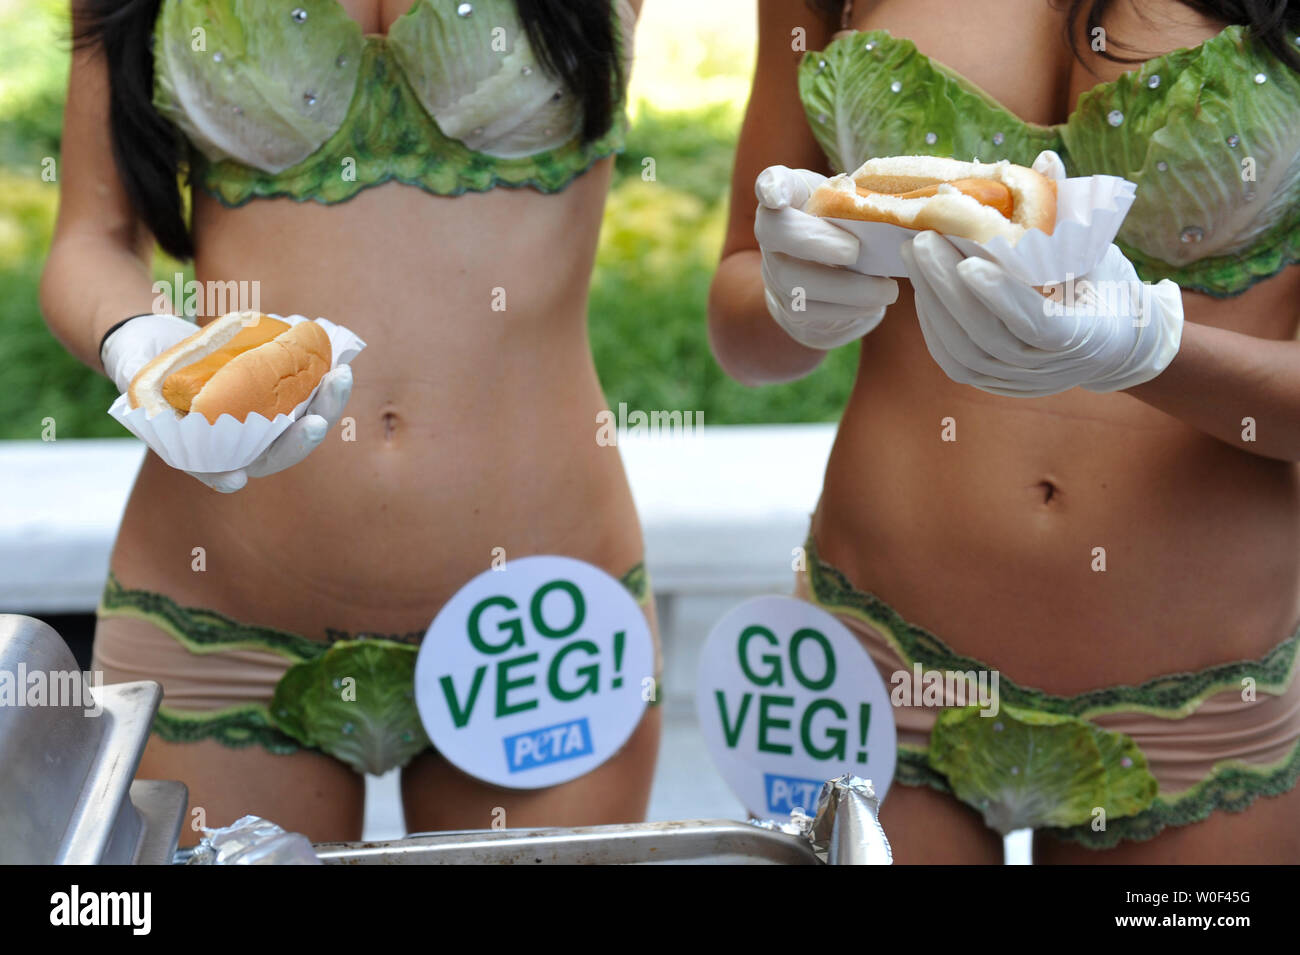 Playboy Playmate of the Year Jayde Nicole (L) and Playmate Joe Garcia (C) serve veggie hot dogs as part of an event put on by People for the Ethical Treatment of Animals (PETA) to call out against National Hot Dog Month, on Capitol Hill in Washington on July 15, 2009. (UPI Photo/Kevin Dietsch) Stock Photo